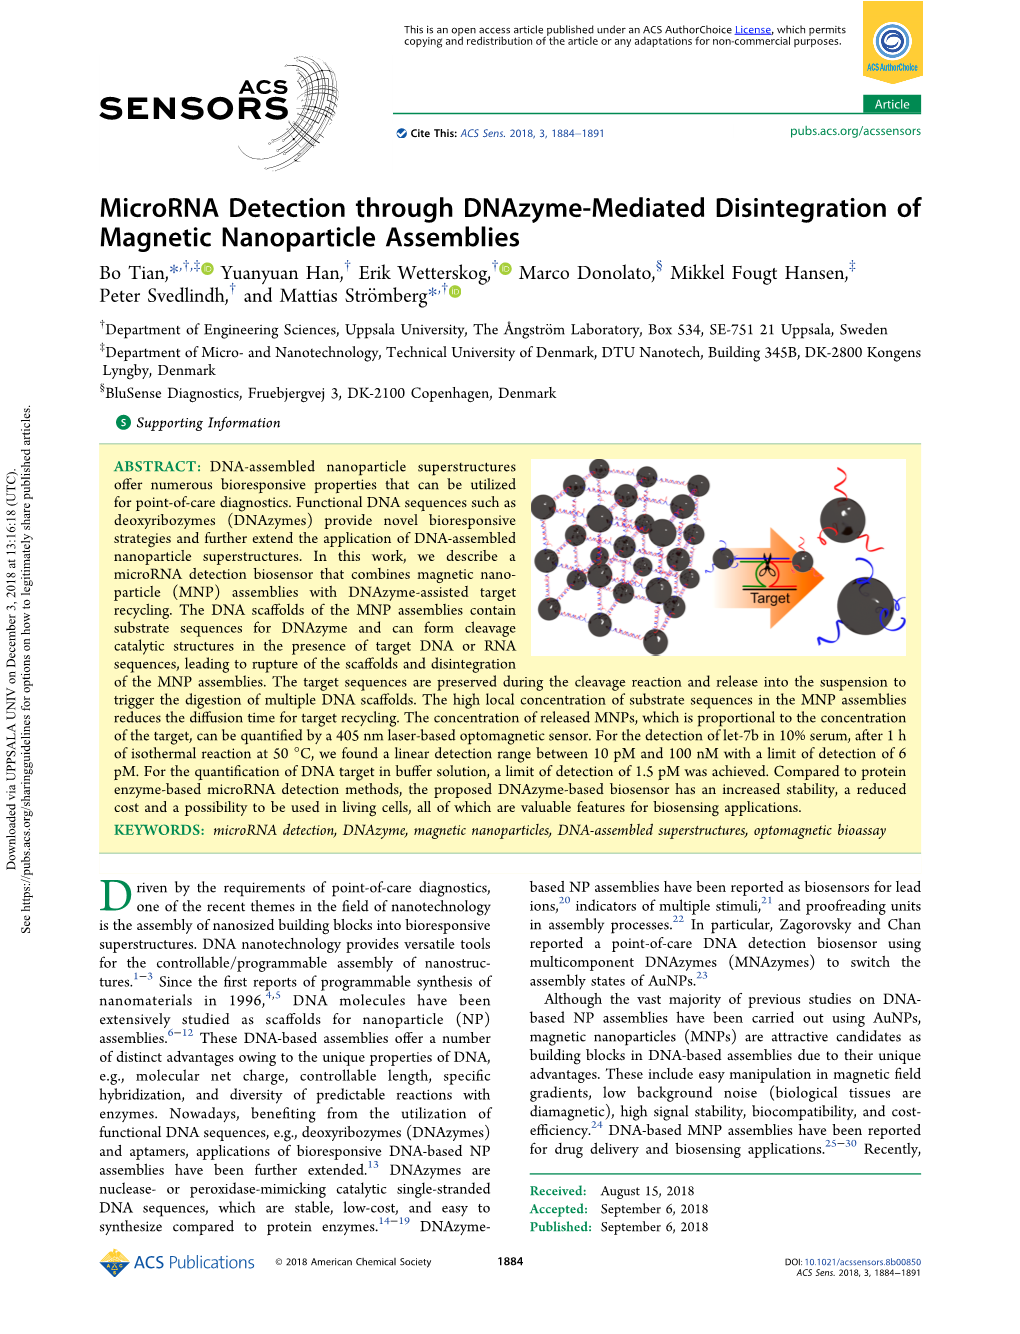 Microrna Detection Through Dnazyme-Mediated Disintegration of Magnetic Nanoparticle Assemblies